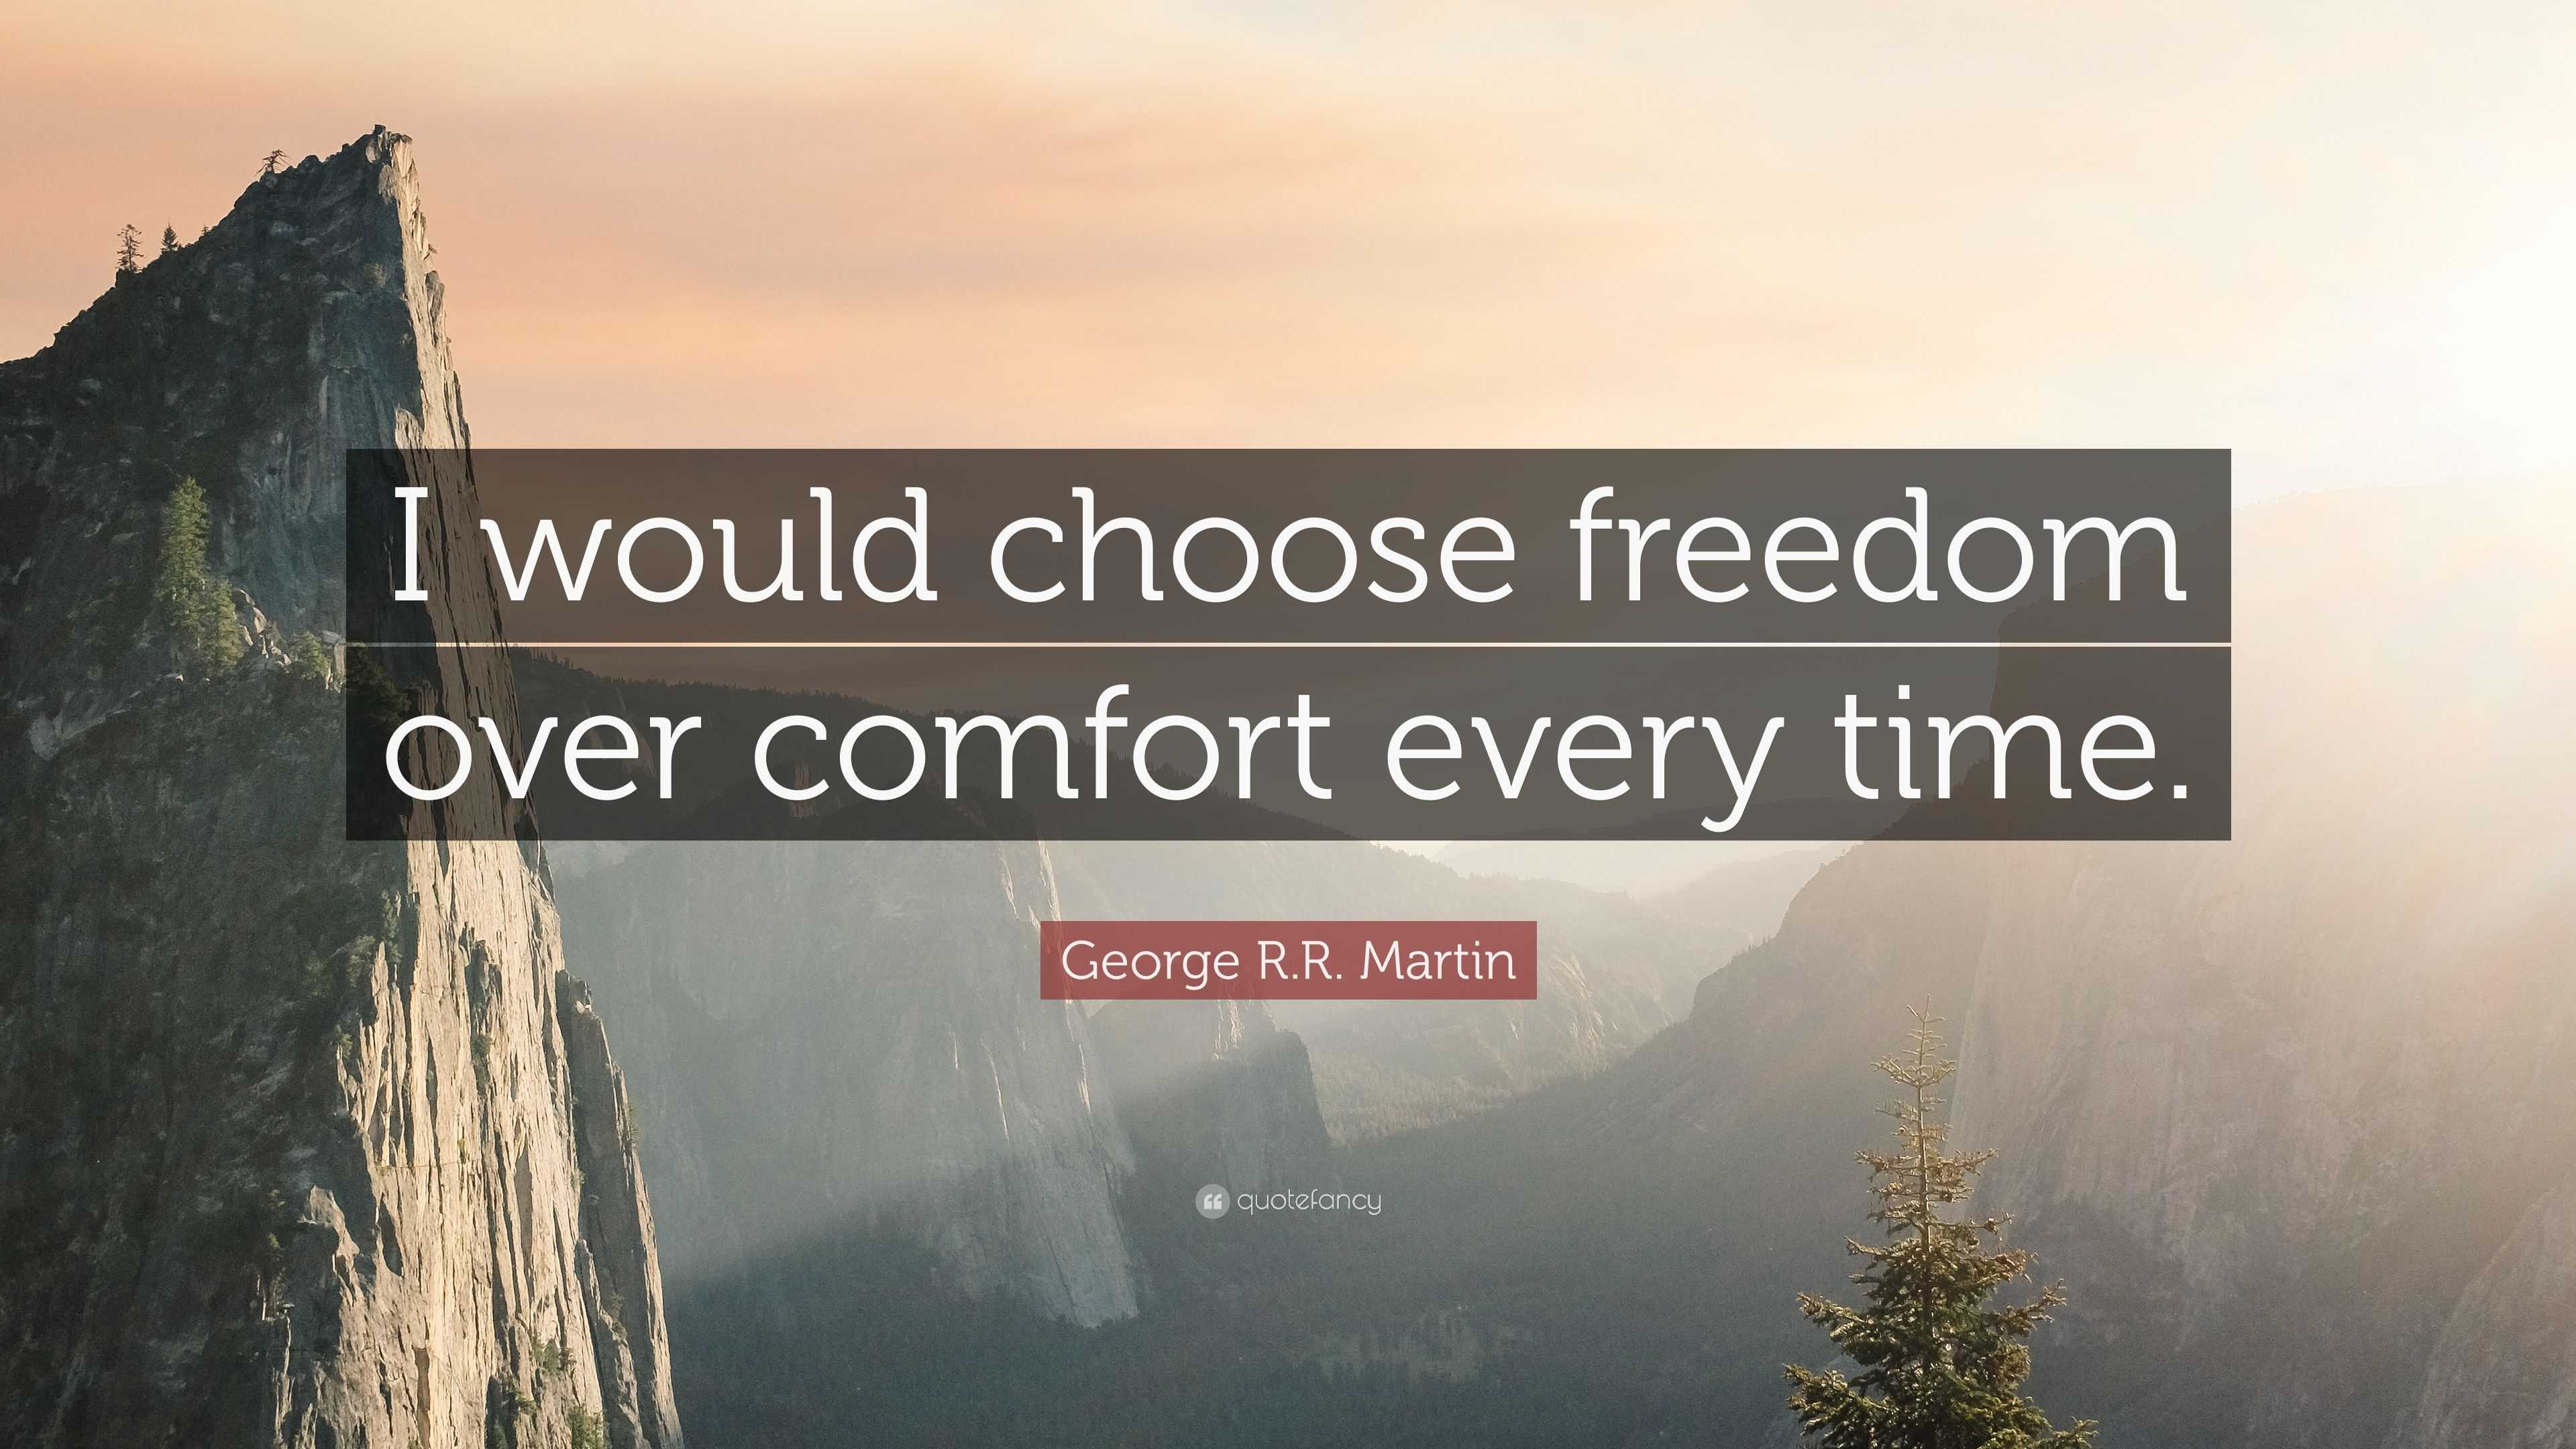 George R.R. Martin Quote: “I would choose freedom over comfort